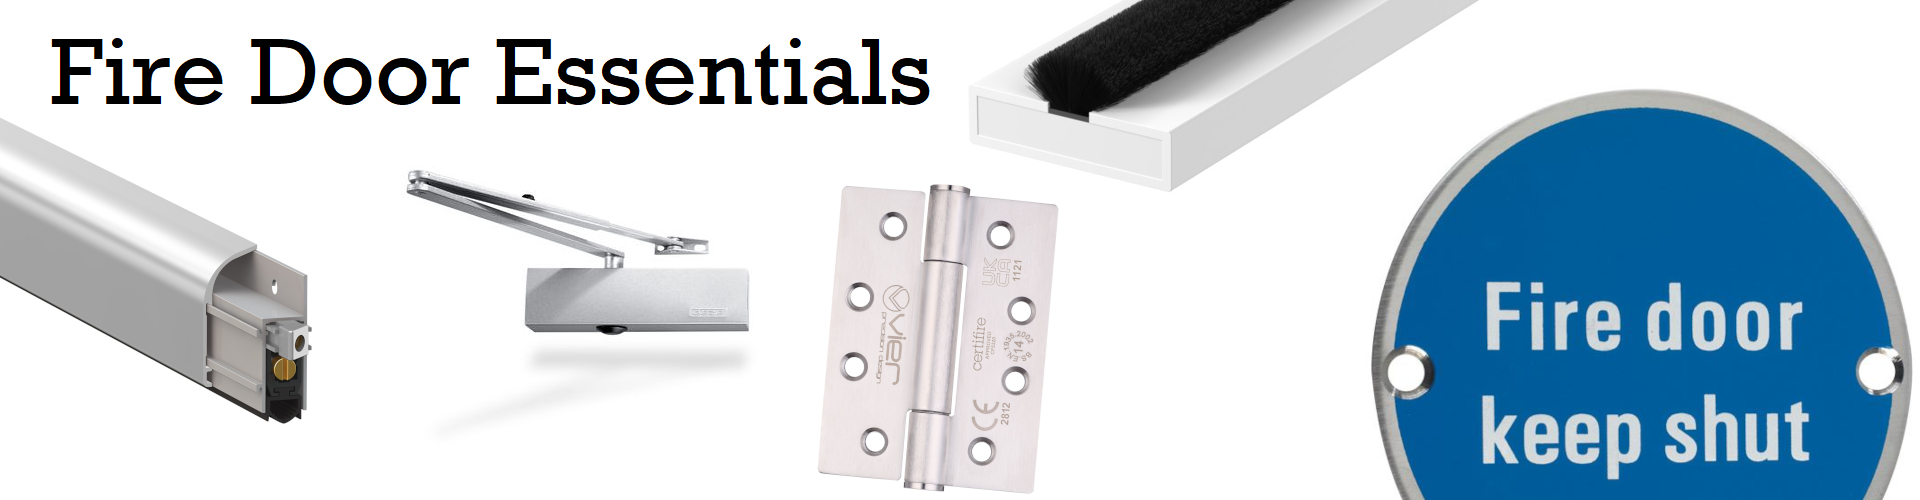 Products for fire doors - banner shows a hinge, signage, various smoke and intumescent seals, and a door closer